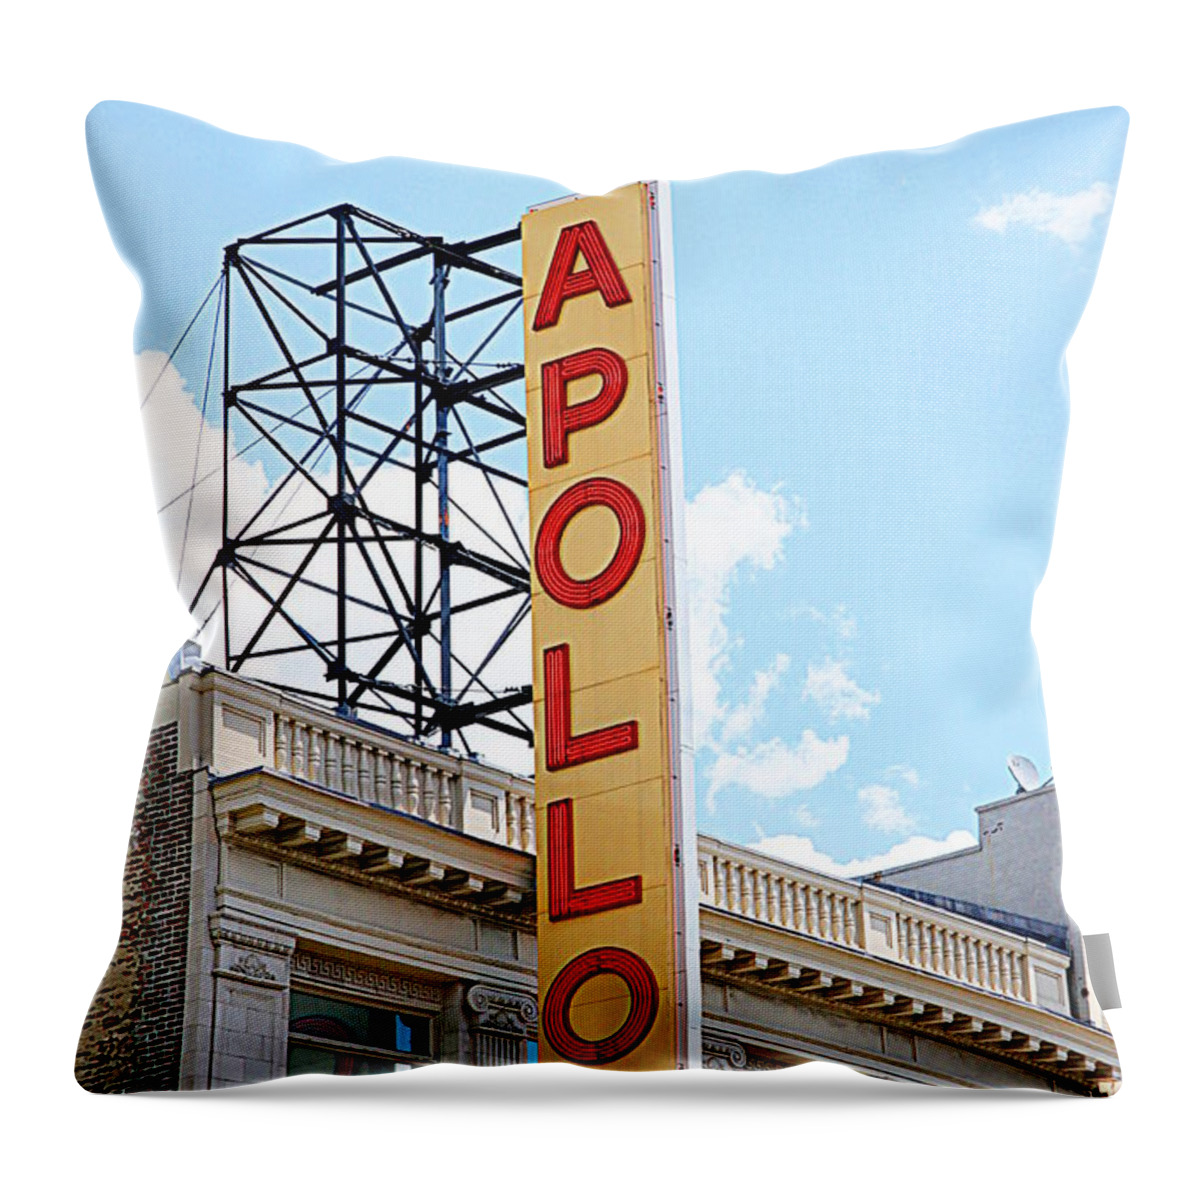 Harlem Throw Pillow featuring the photograph Apollo Theater Sign by Valentino Visentini